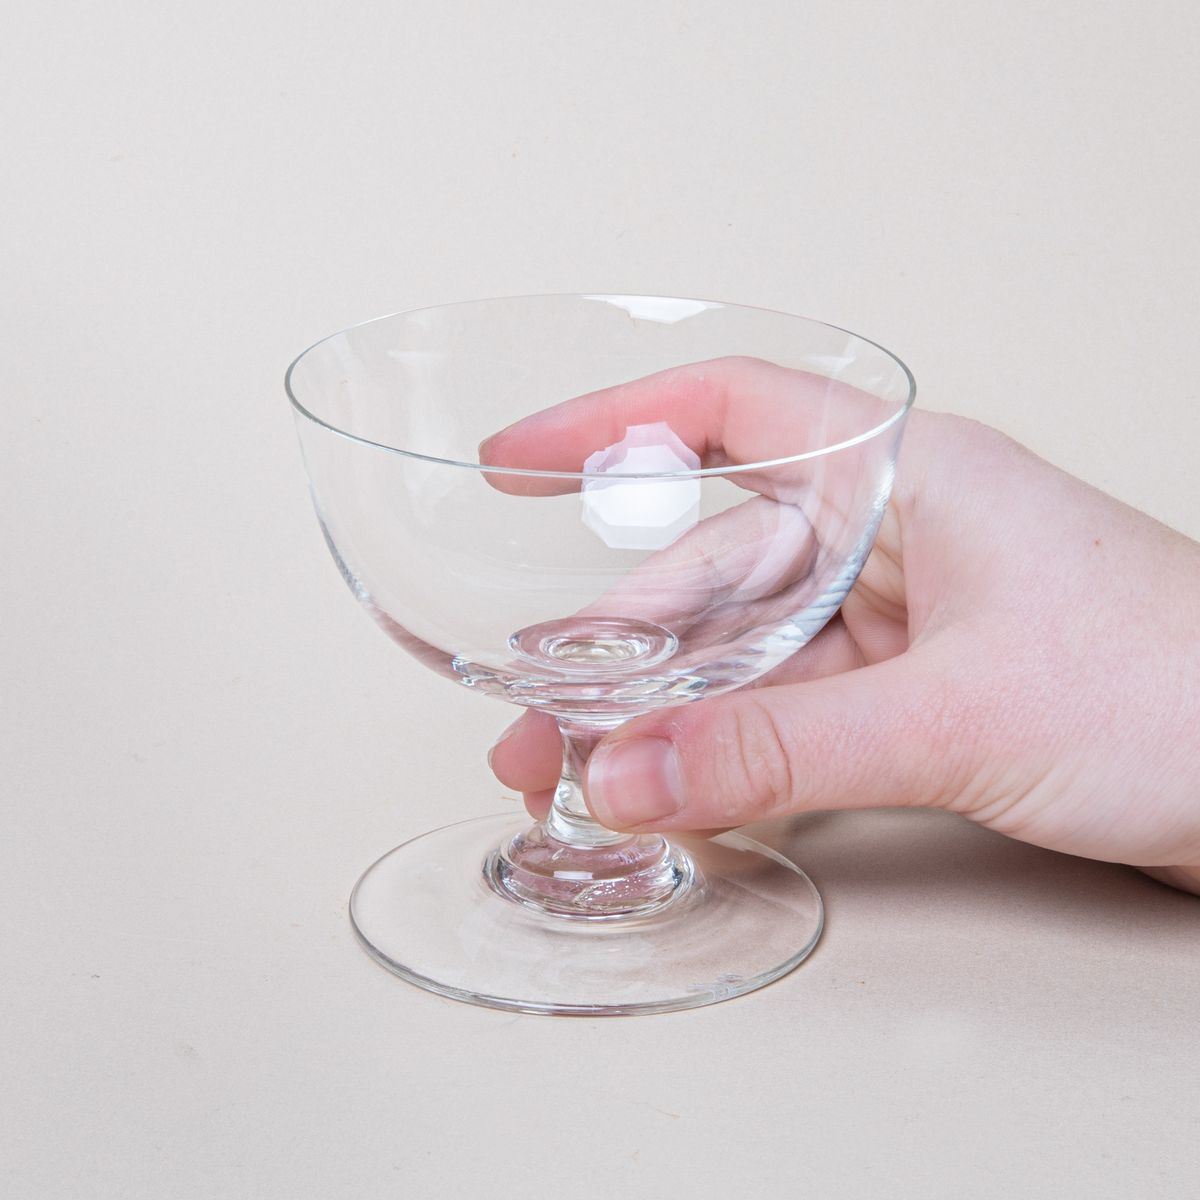 A hand holding a clear coupe glass with a short stem and wide base